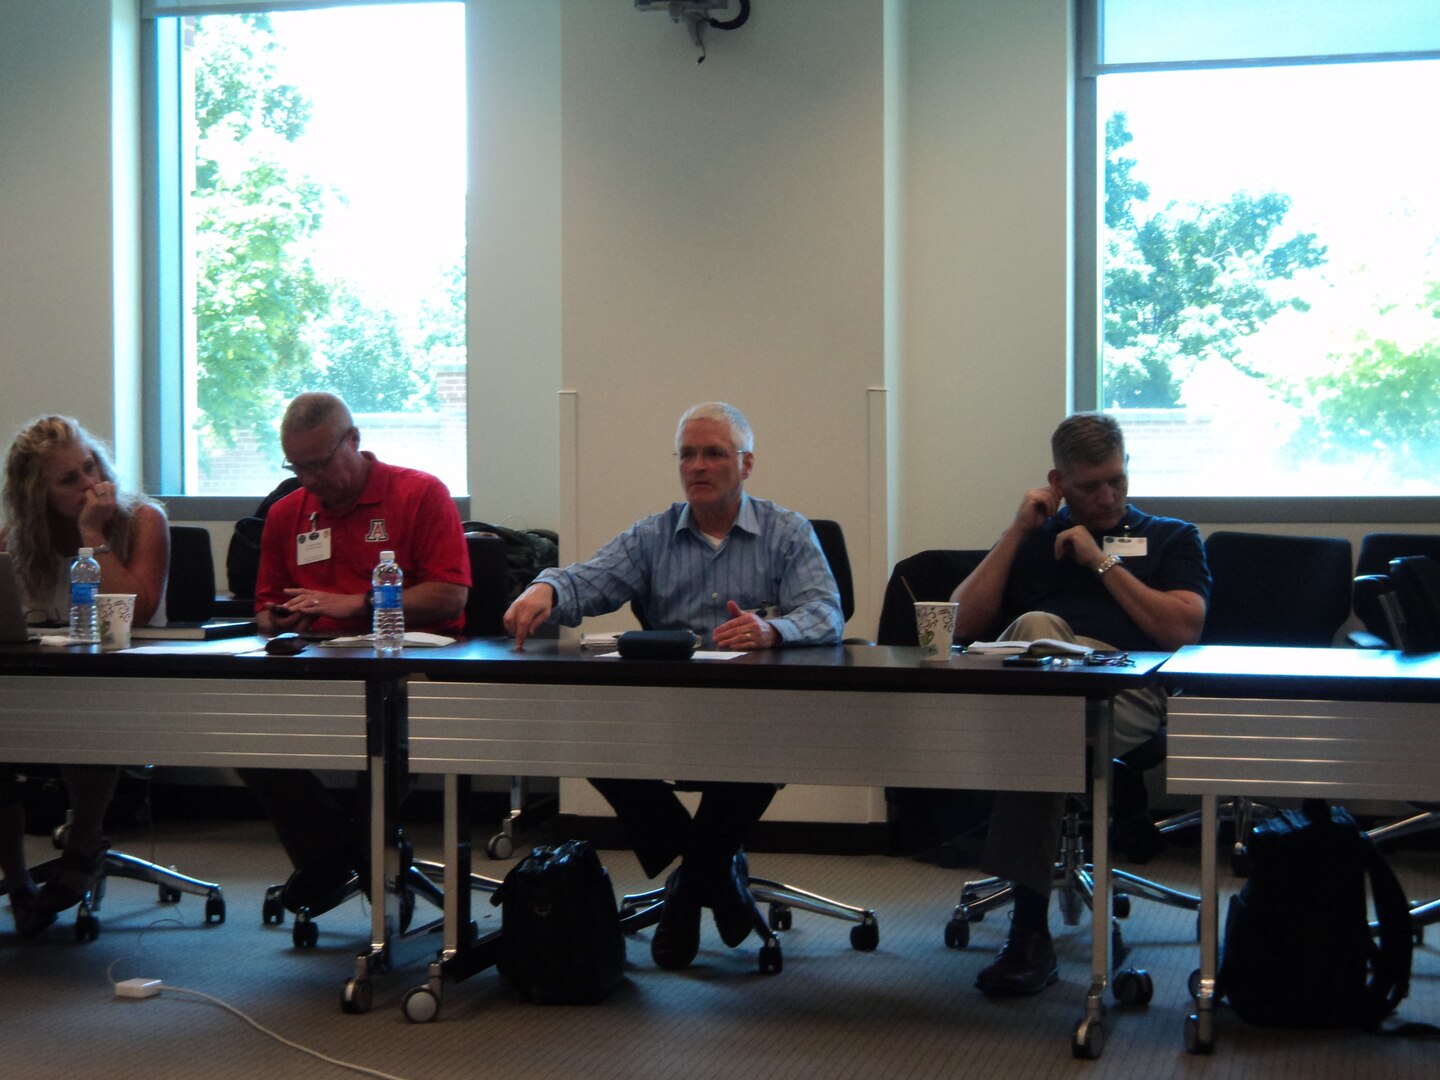 Attendees discuss the value of relevant logistics research during the 2015 Joint Logistics Faculty Development Workshop hosted recently by the Center for Joint & Strategic Logistics at Fort McNair, Washington DC.